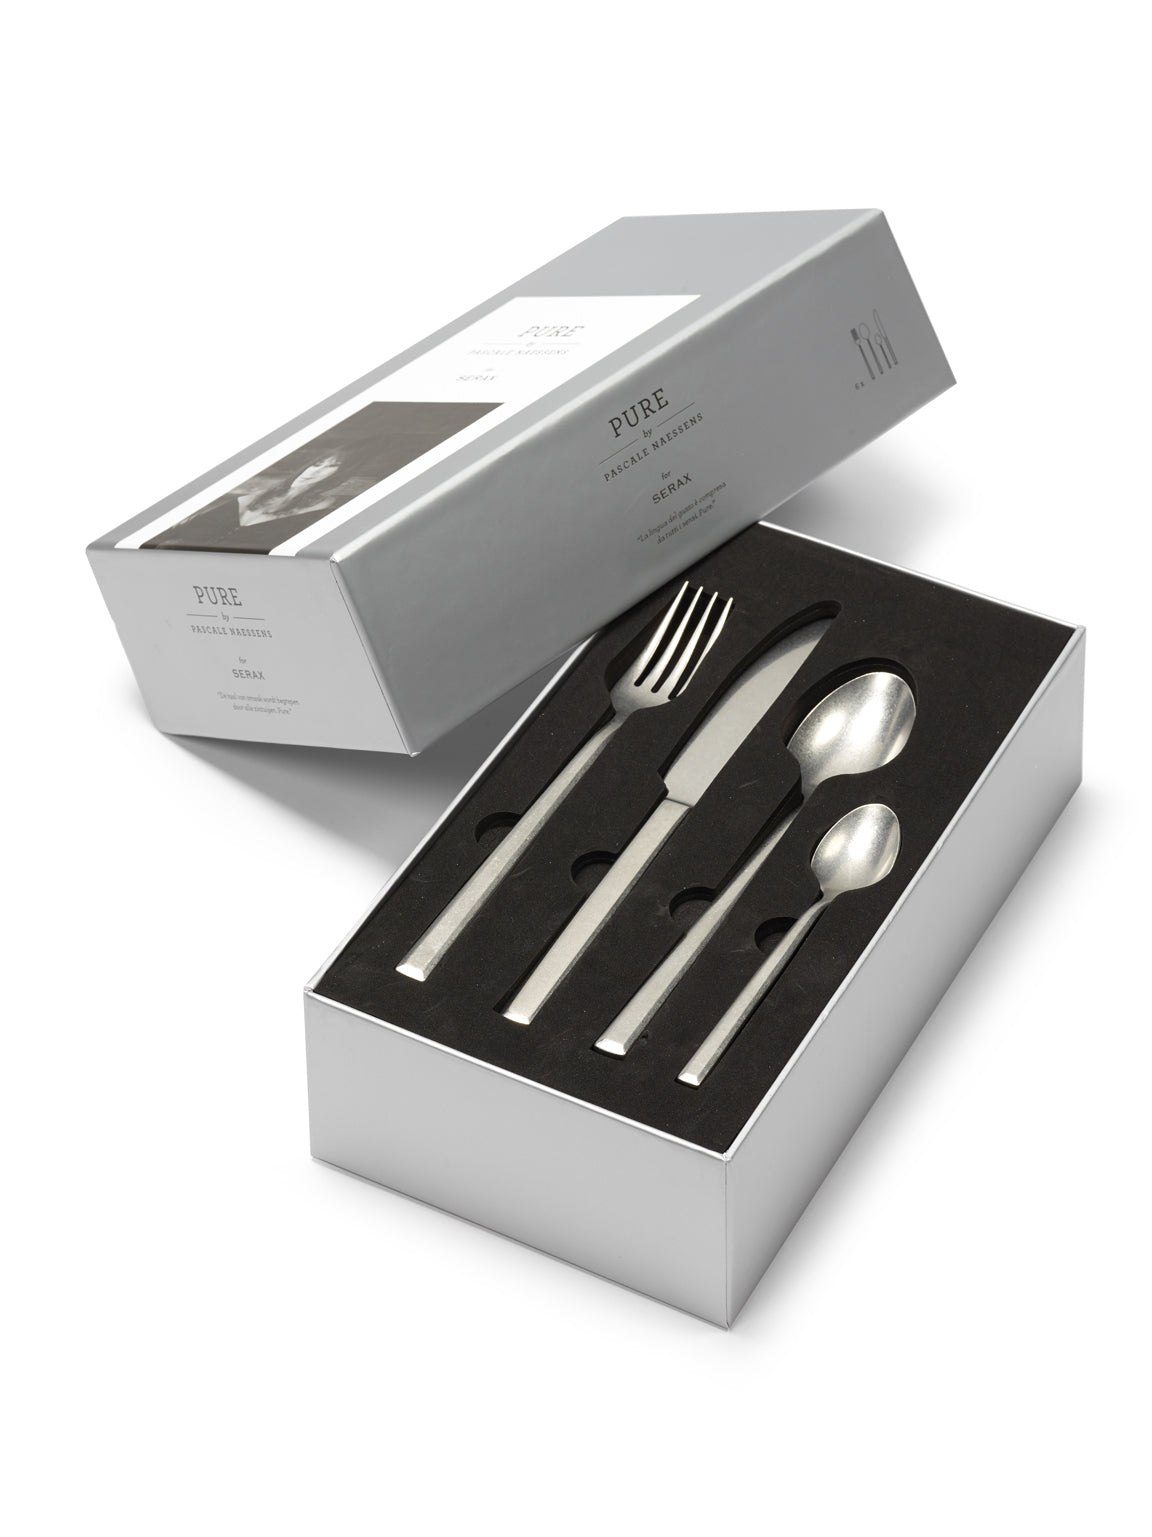 PURE - cutlery set in a gift box (24 pieces)